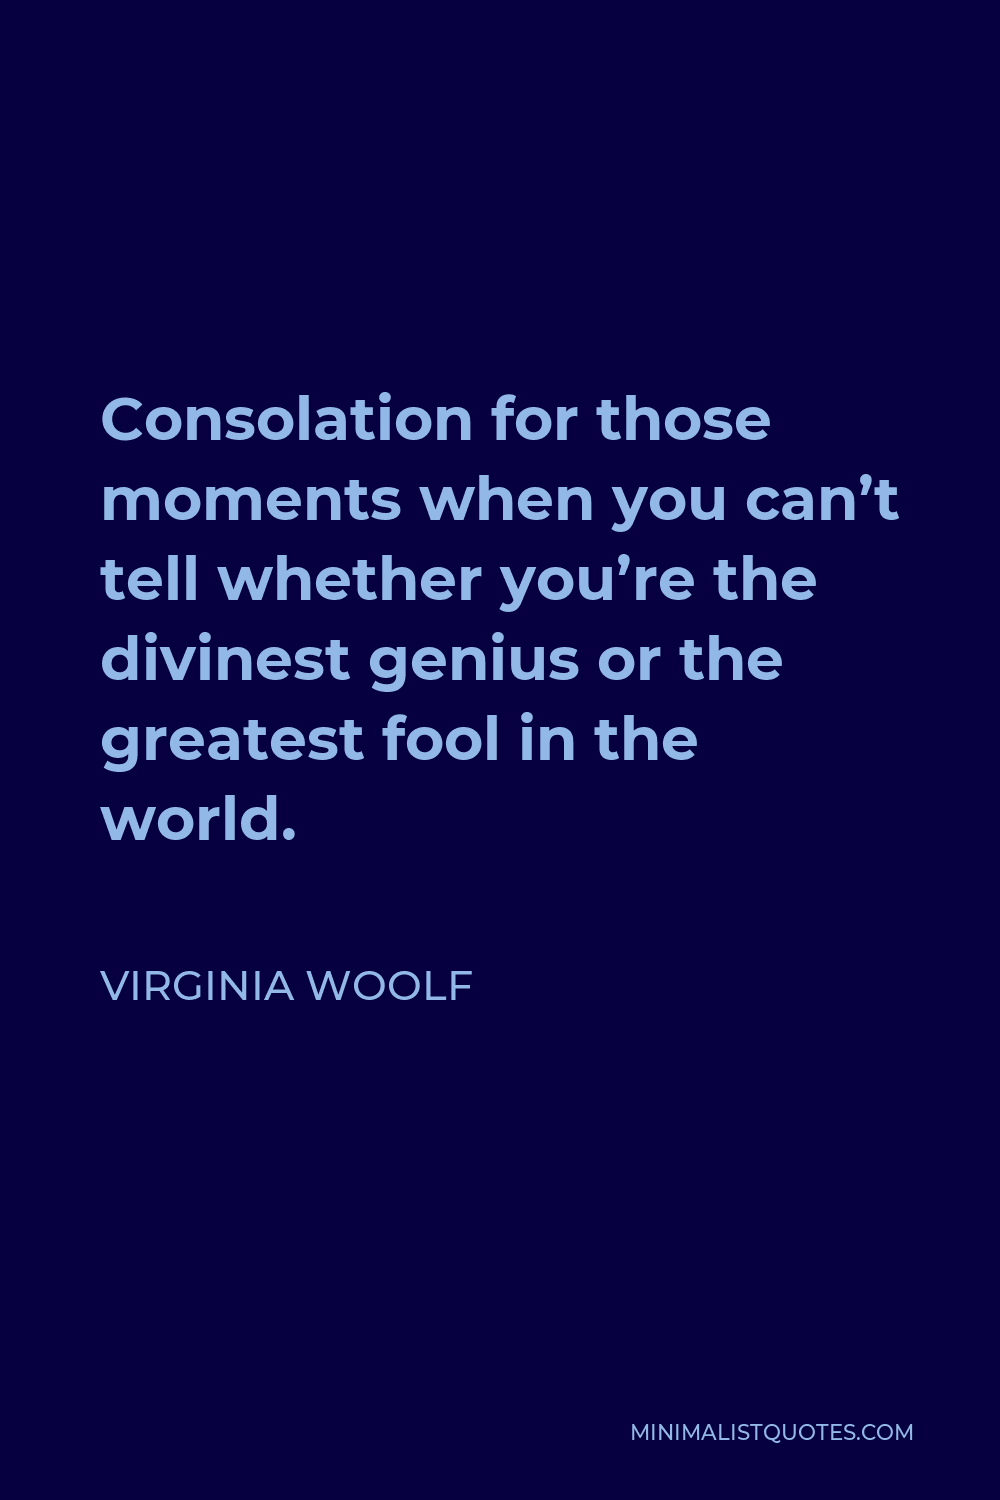 Virginia Woolf Quote - Consolation for those moments when you can’t tell whether you’re the divinest genius or the greatest fool in the world.